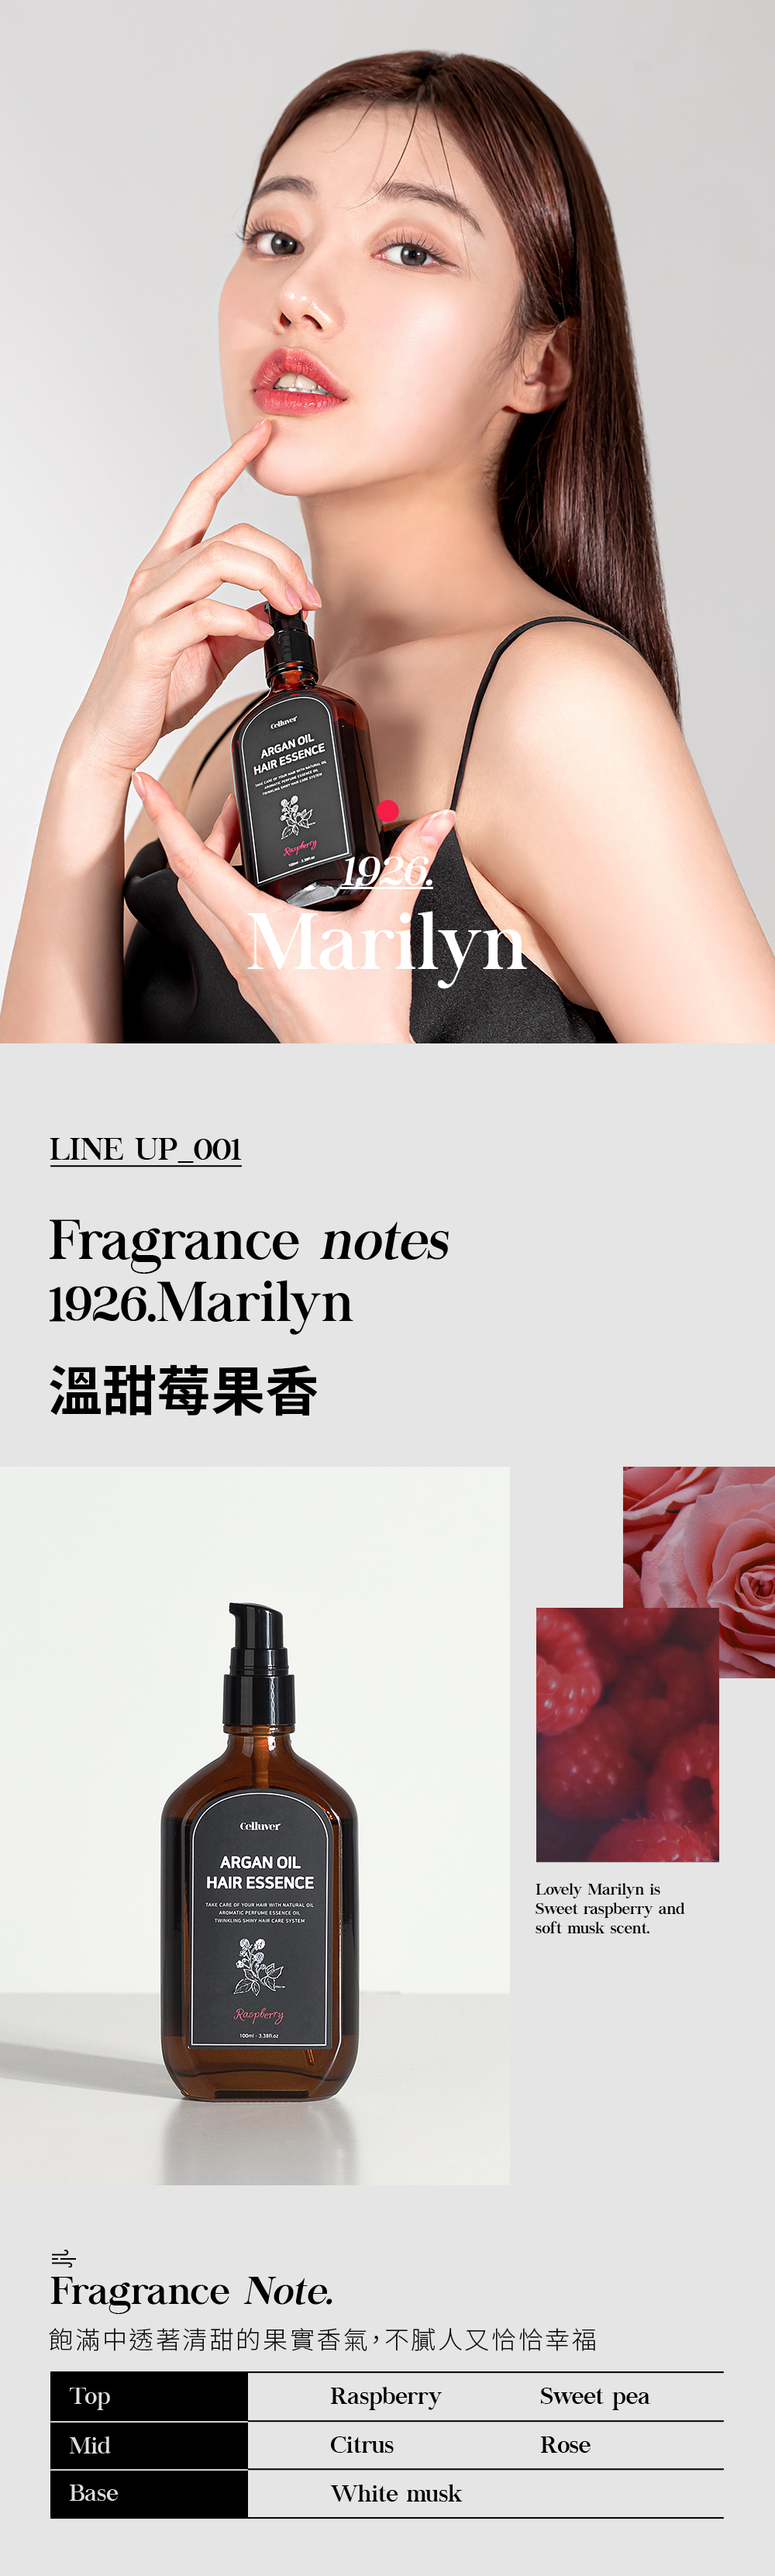 ARGAN LHAIR ESSENCE1926MarilynLINE Fragrance notes1926Marilyn溫甜莓果香CelluverARGAN HAIR ESSENCETAKE CARE OF YOUR HAIR WITH NATURAL OIAROMATIC PERFUME ESSENCE OILTWINKLING SHINY HAIR CARE SYSTEMLovely Marilyn isSweet raspberry andsoft musk scent.Raspberry  Fragrance Note.飽滿中透著清甜的果實香氣,不膩人又恰恰幸福RaspberrySweet peaMidCitrusRoseBaseWhite musk